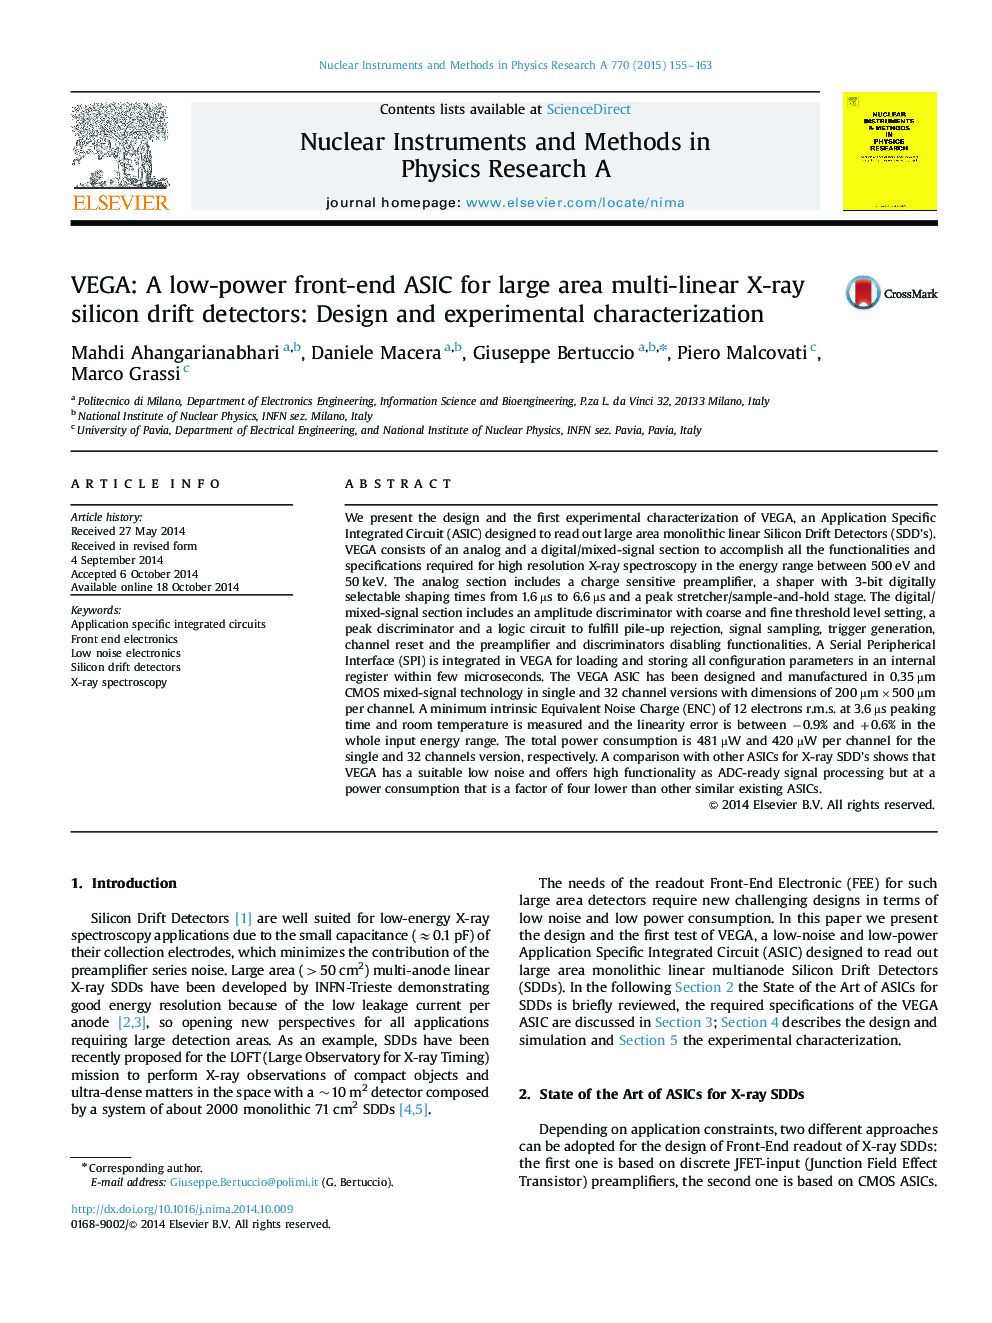 VEGA: A low-power front-end ASIC for large area multi-linear X-ray silicon drift detectors: Design and experimental characterization